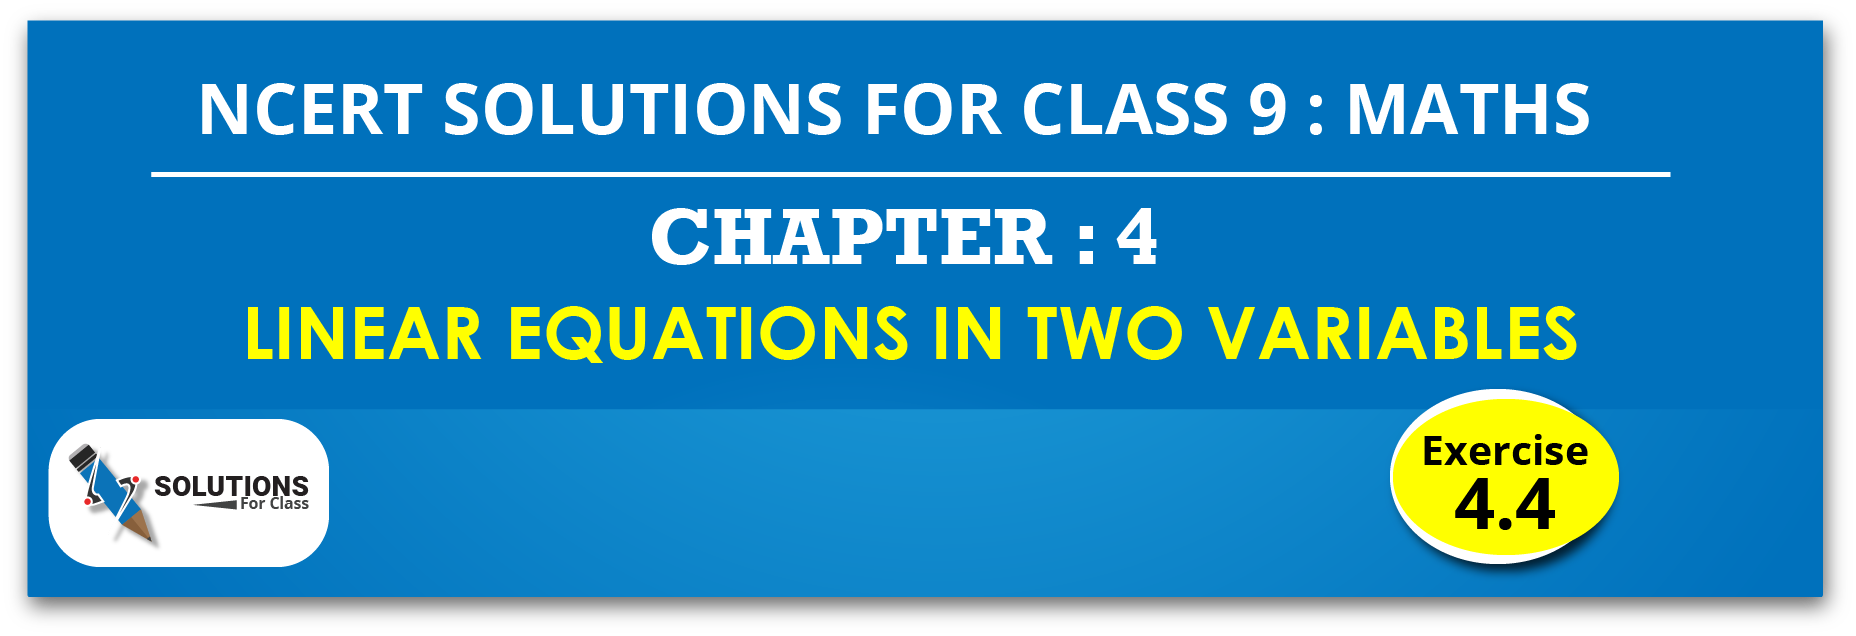 NCERT Solution For Class 9, Maths, Chapter 4, Linear Equations In Two Variables, Exercise 4.4